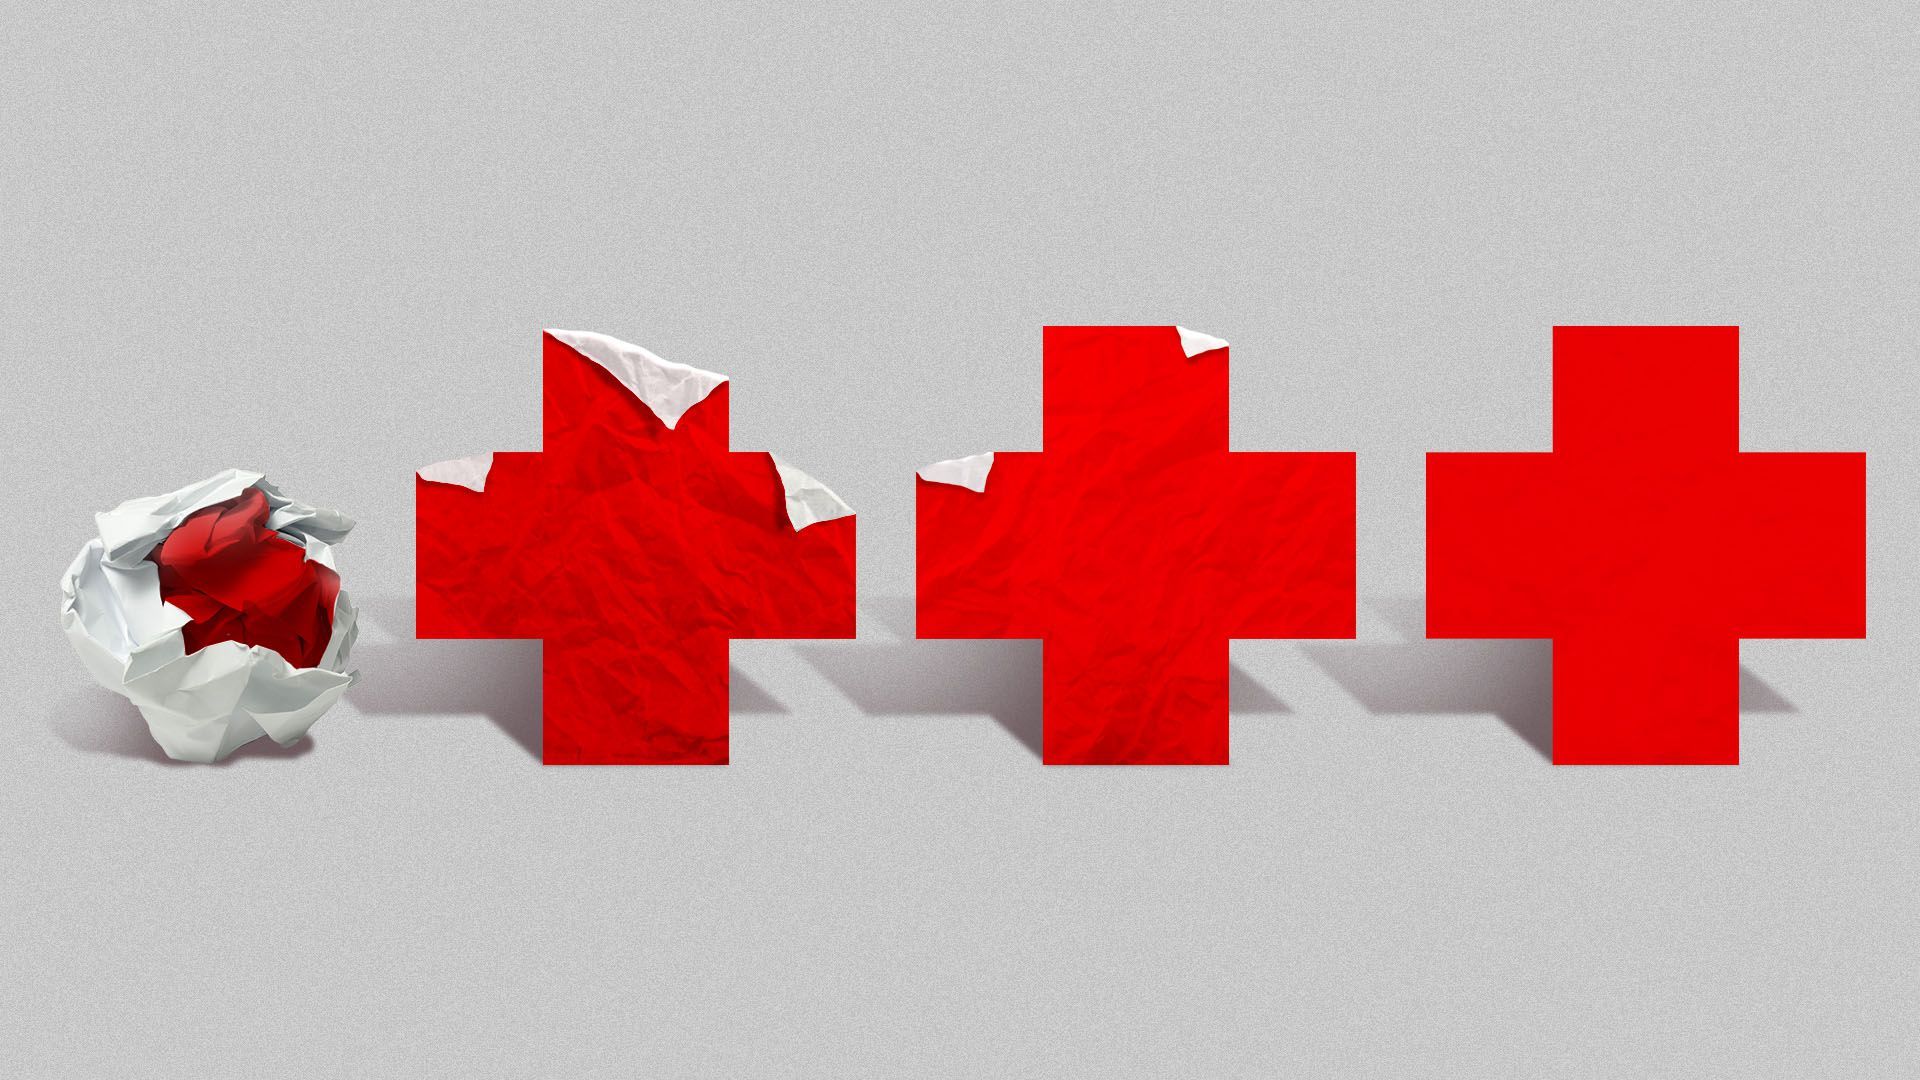 Illustration of a ball of crumpled paper evolving into a red cross